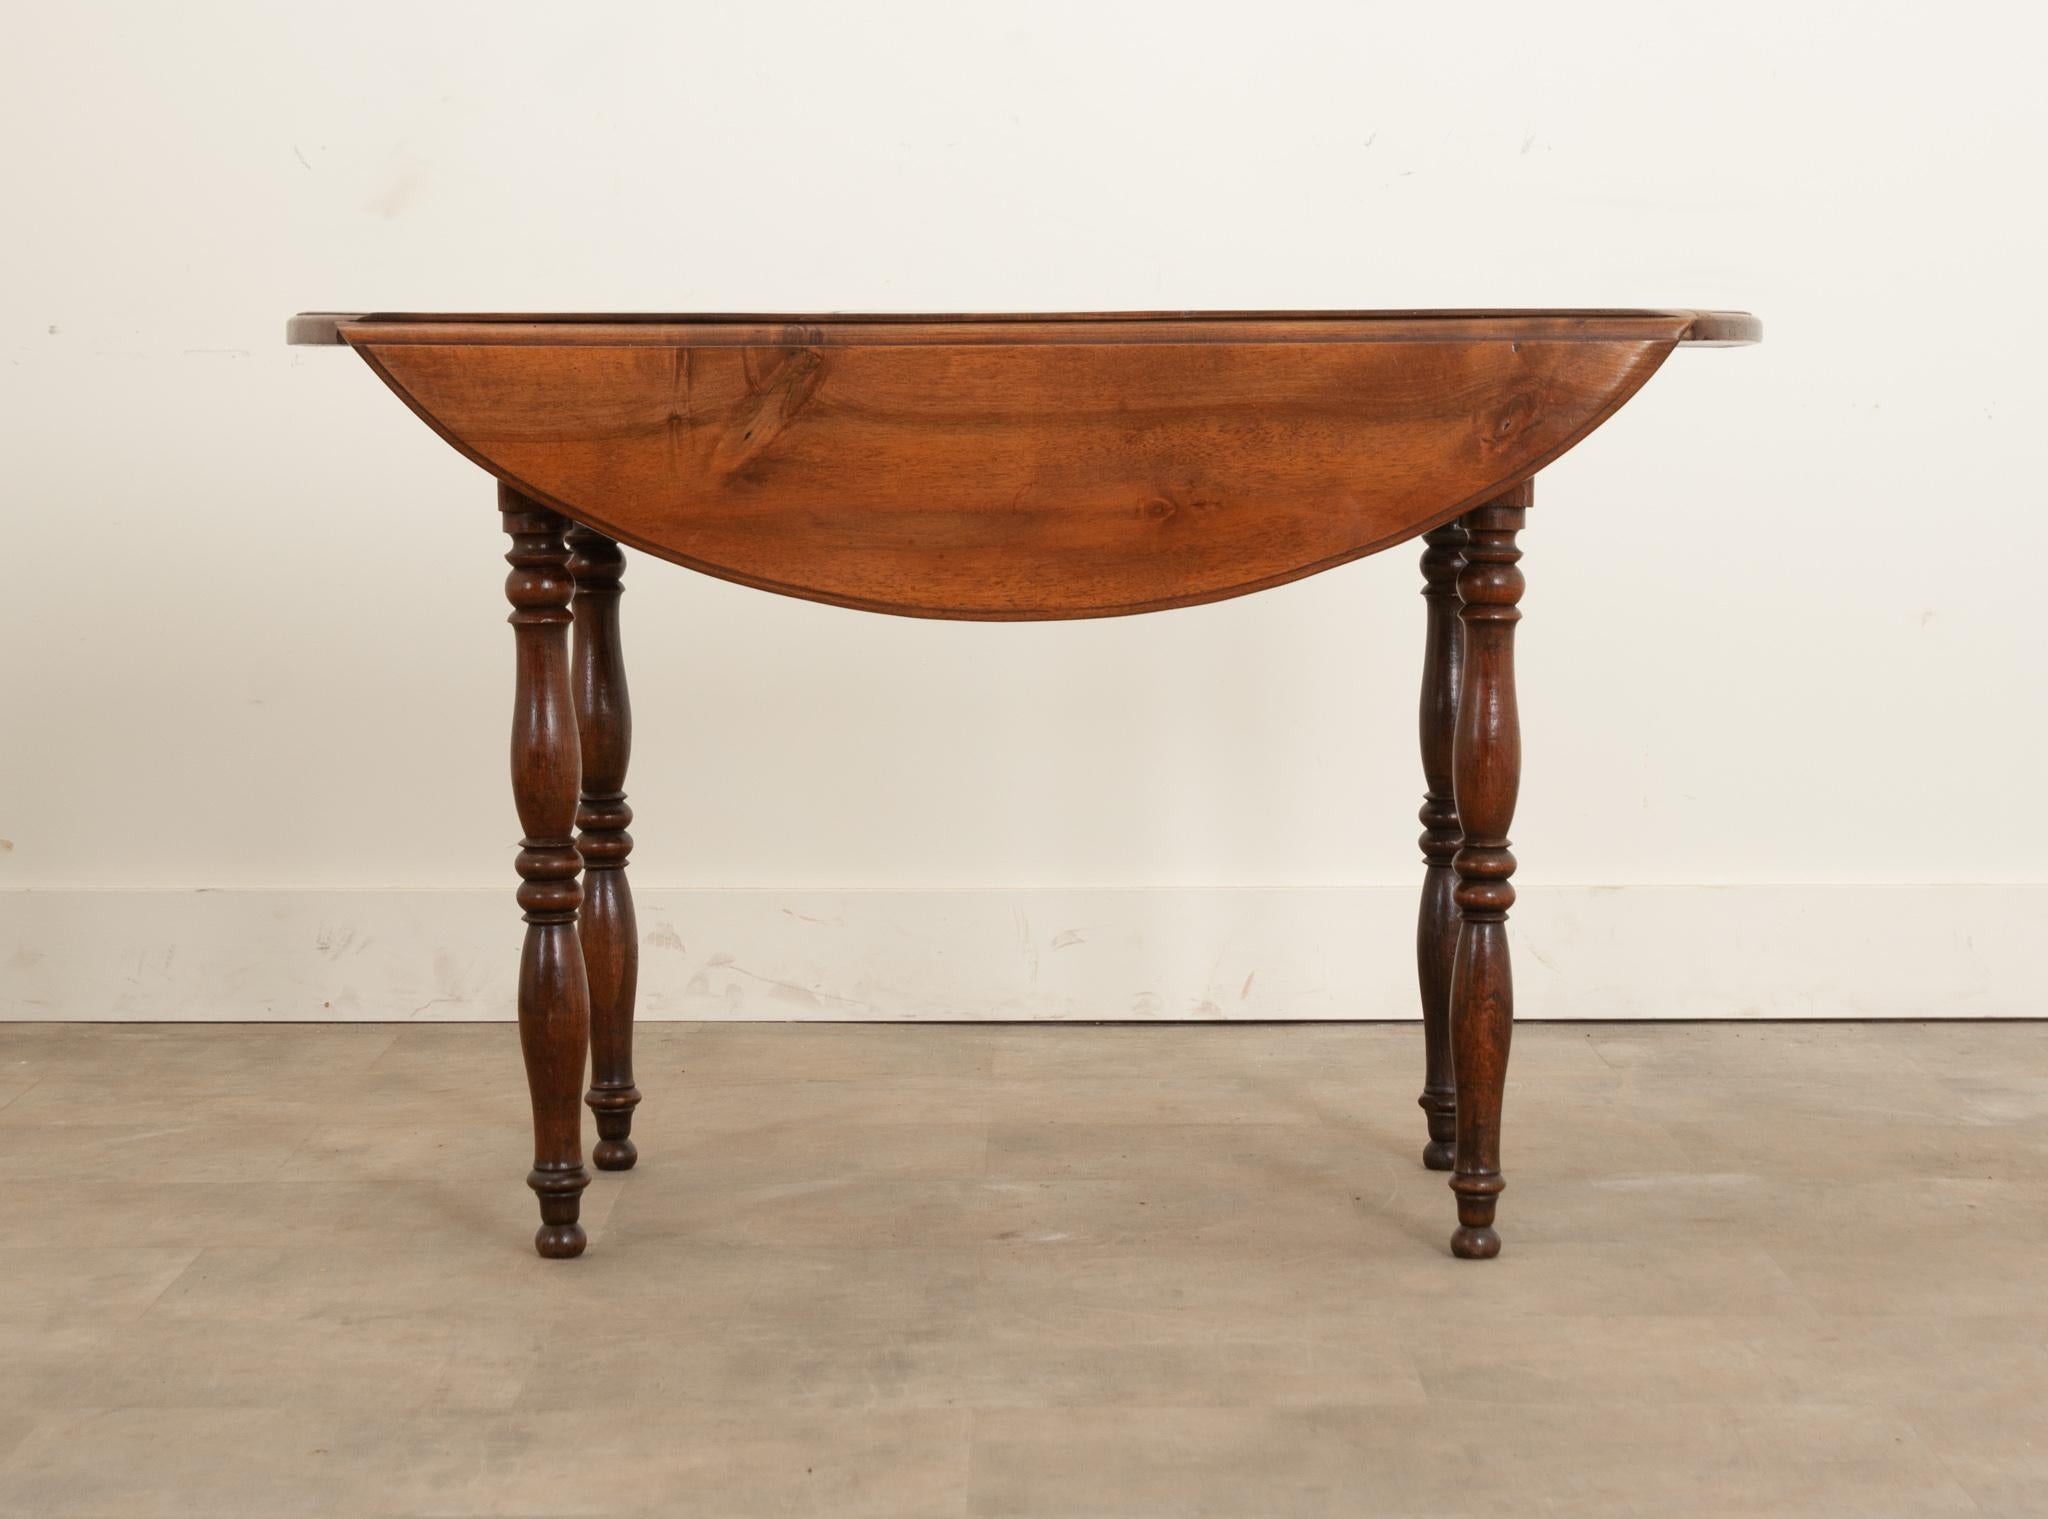 A lovely French 19th century drop leaf dining table crafted from solid fruitwood. The top sits over a simple apron supported with four wonderfully turned legs. Each drop leaf has a wood support that pulls out with an iron handle from under the